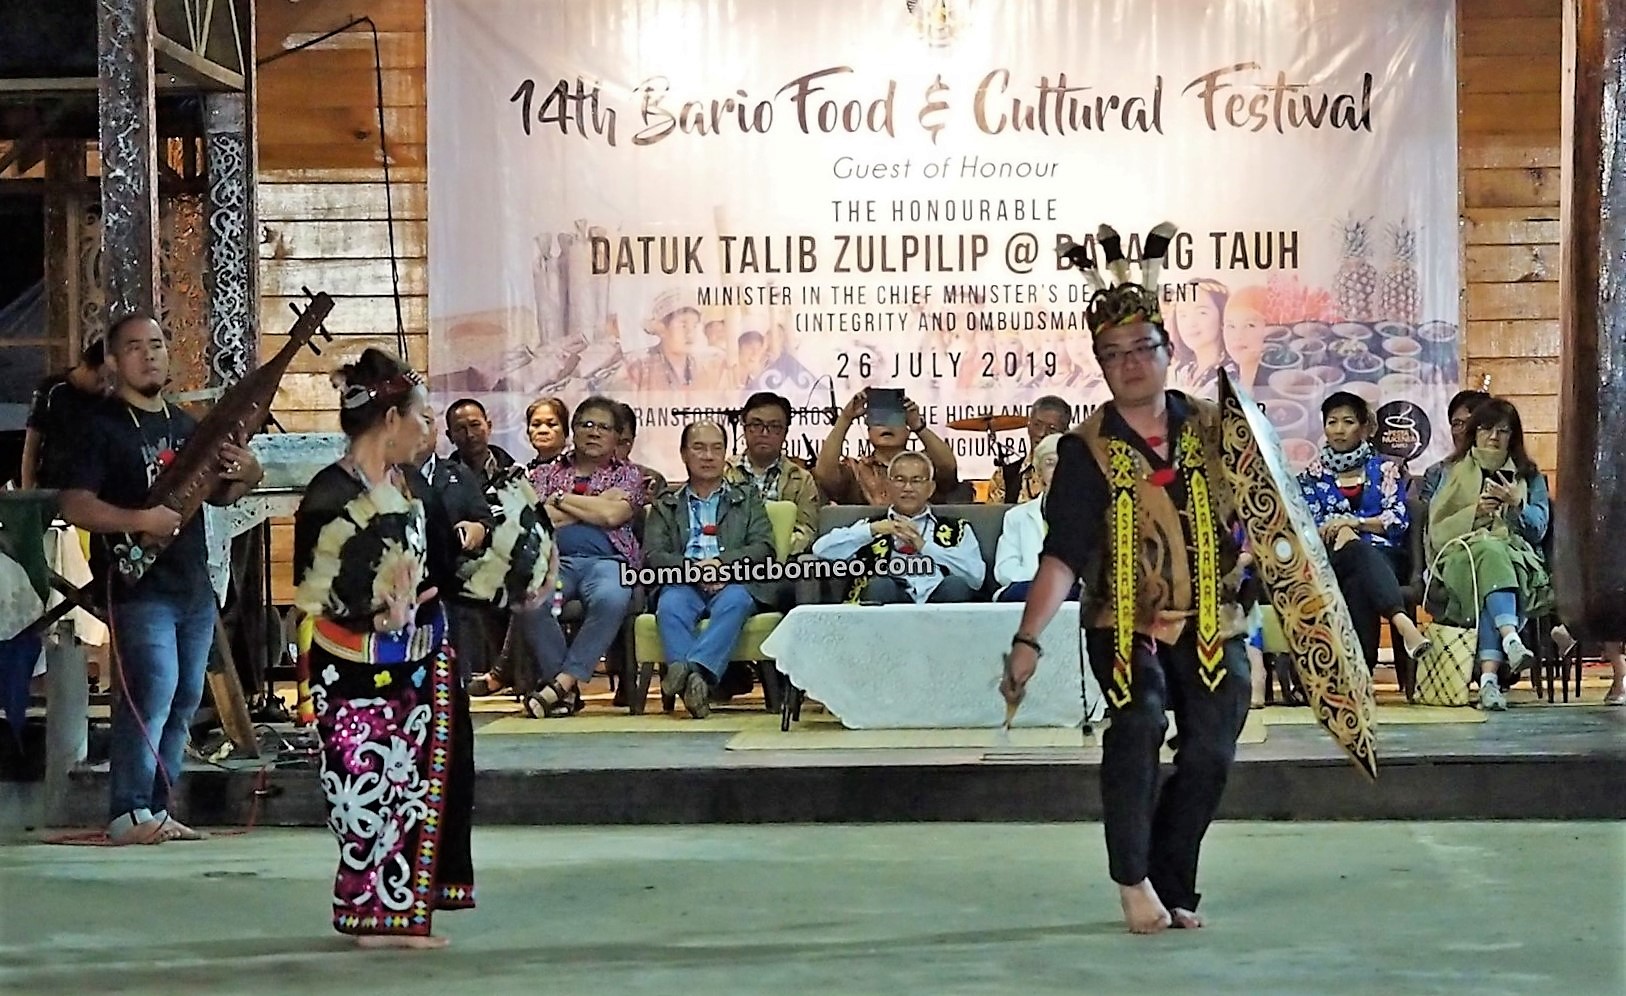 Bario Food Cultural Festival, traditional dance, authentic, indigenous, exploration, Dayak, Ethnic, Orang Ulu, tribal, event, Malaysia, Tourist attraction, 探索婆罗洲砂拉越, 巴里奥加拉毕族文化, 乌鲁人传统舞蹈